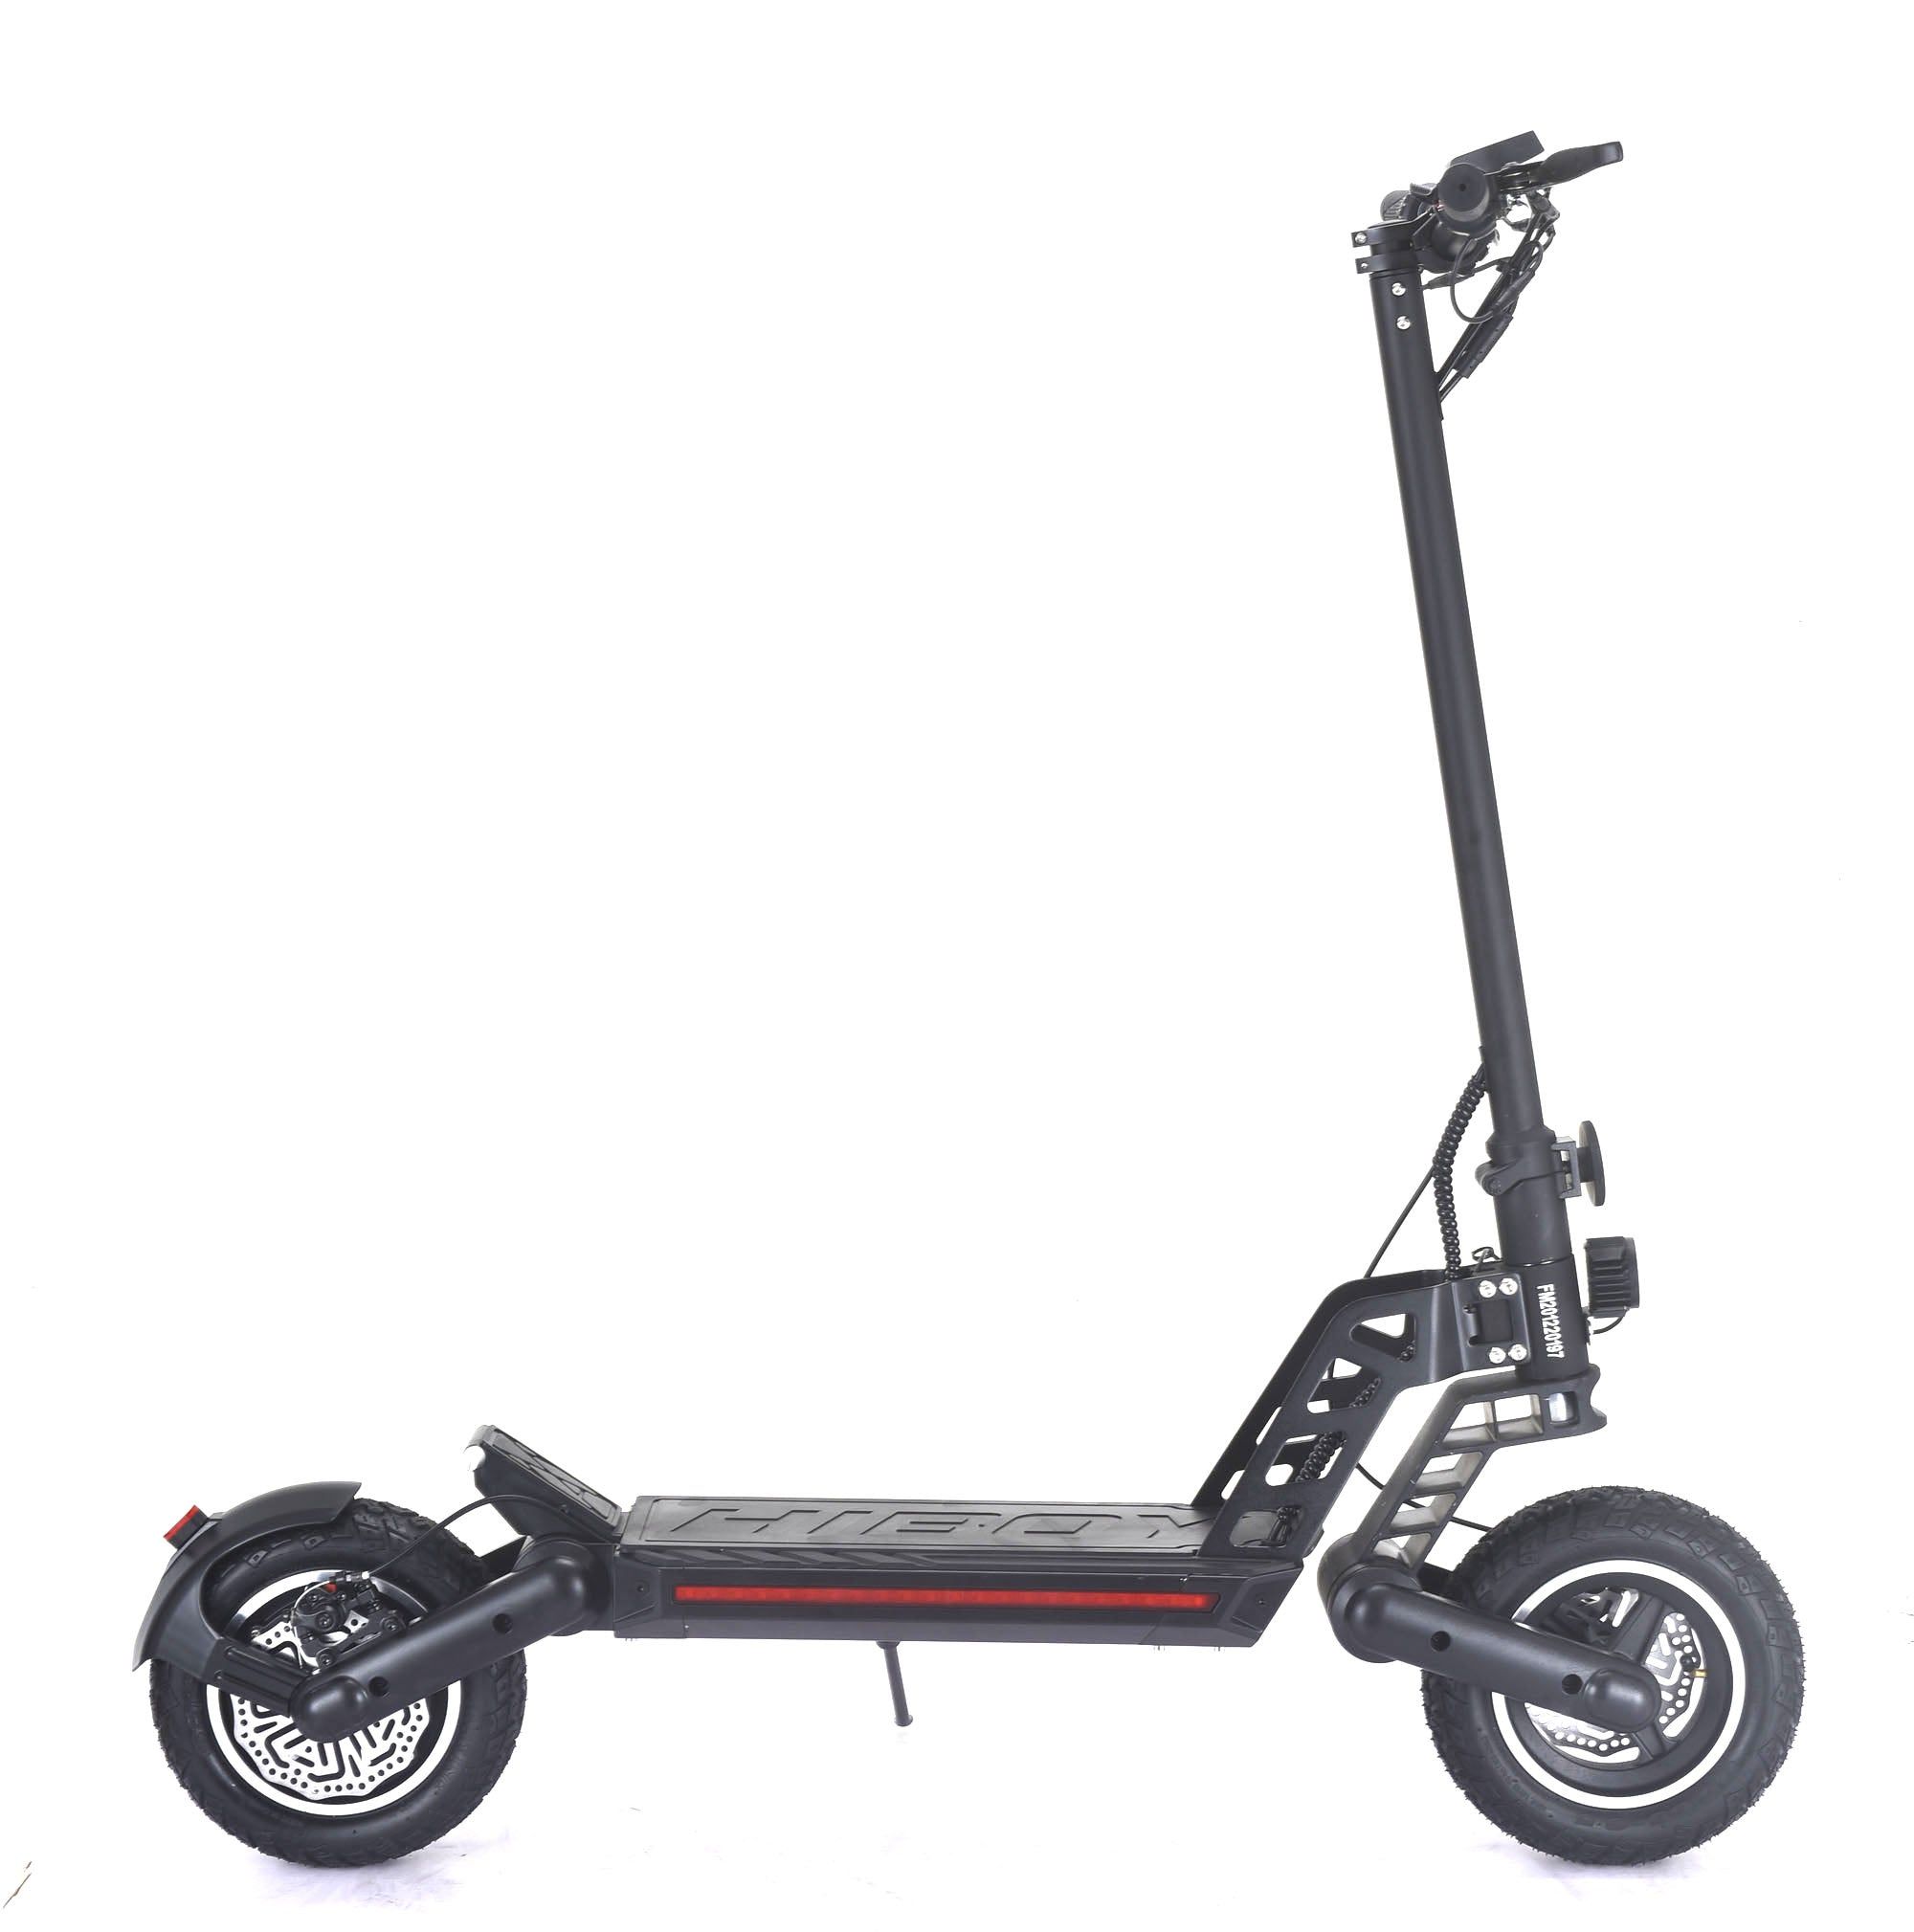 48V Freddo G2 E-Scooter. 800W motor, Shock absorbers, turn signal light and brake lights, 26 mph Kids Cars CA - Ride On Toys Store